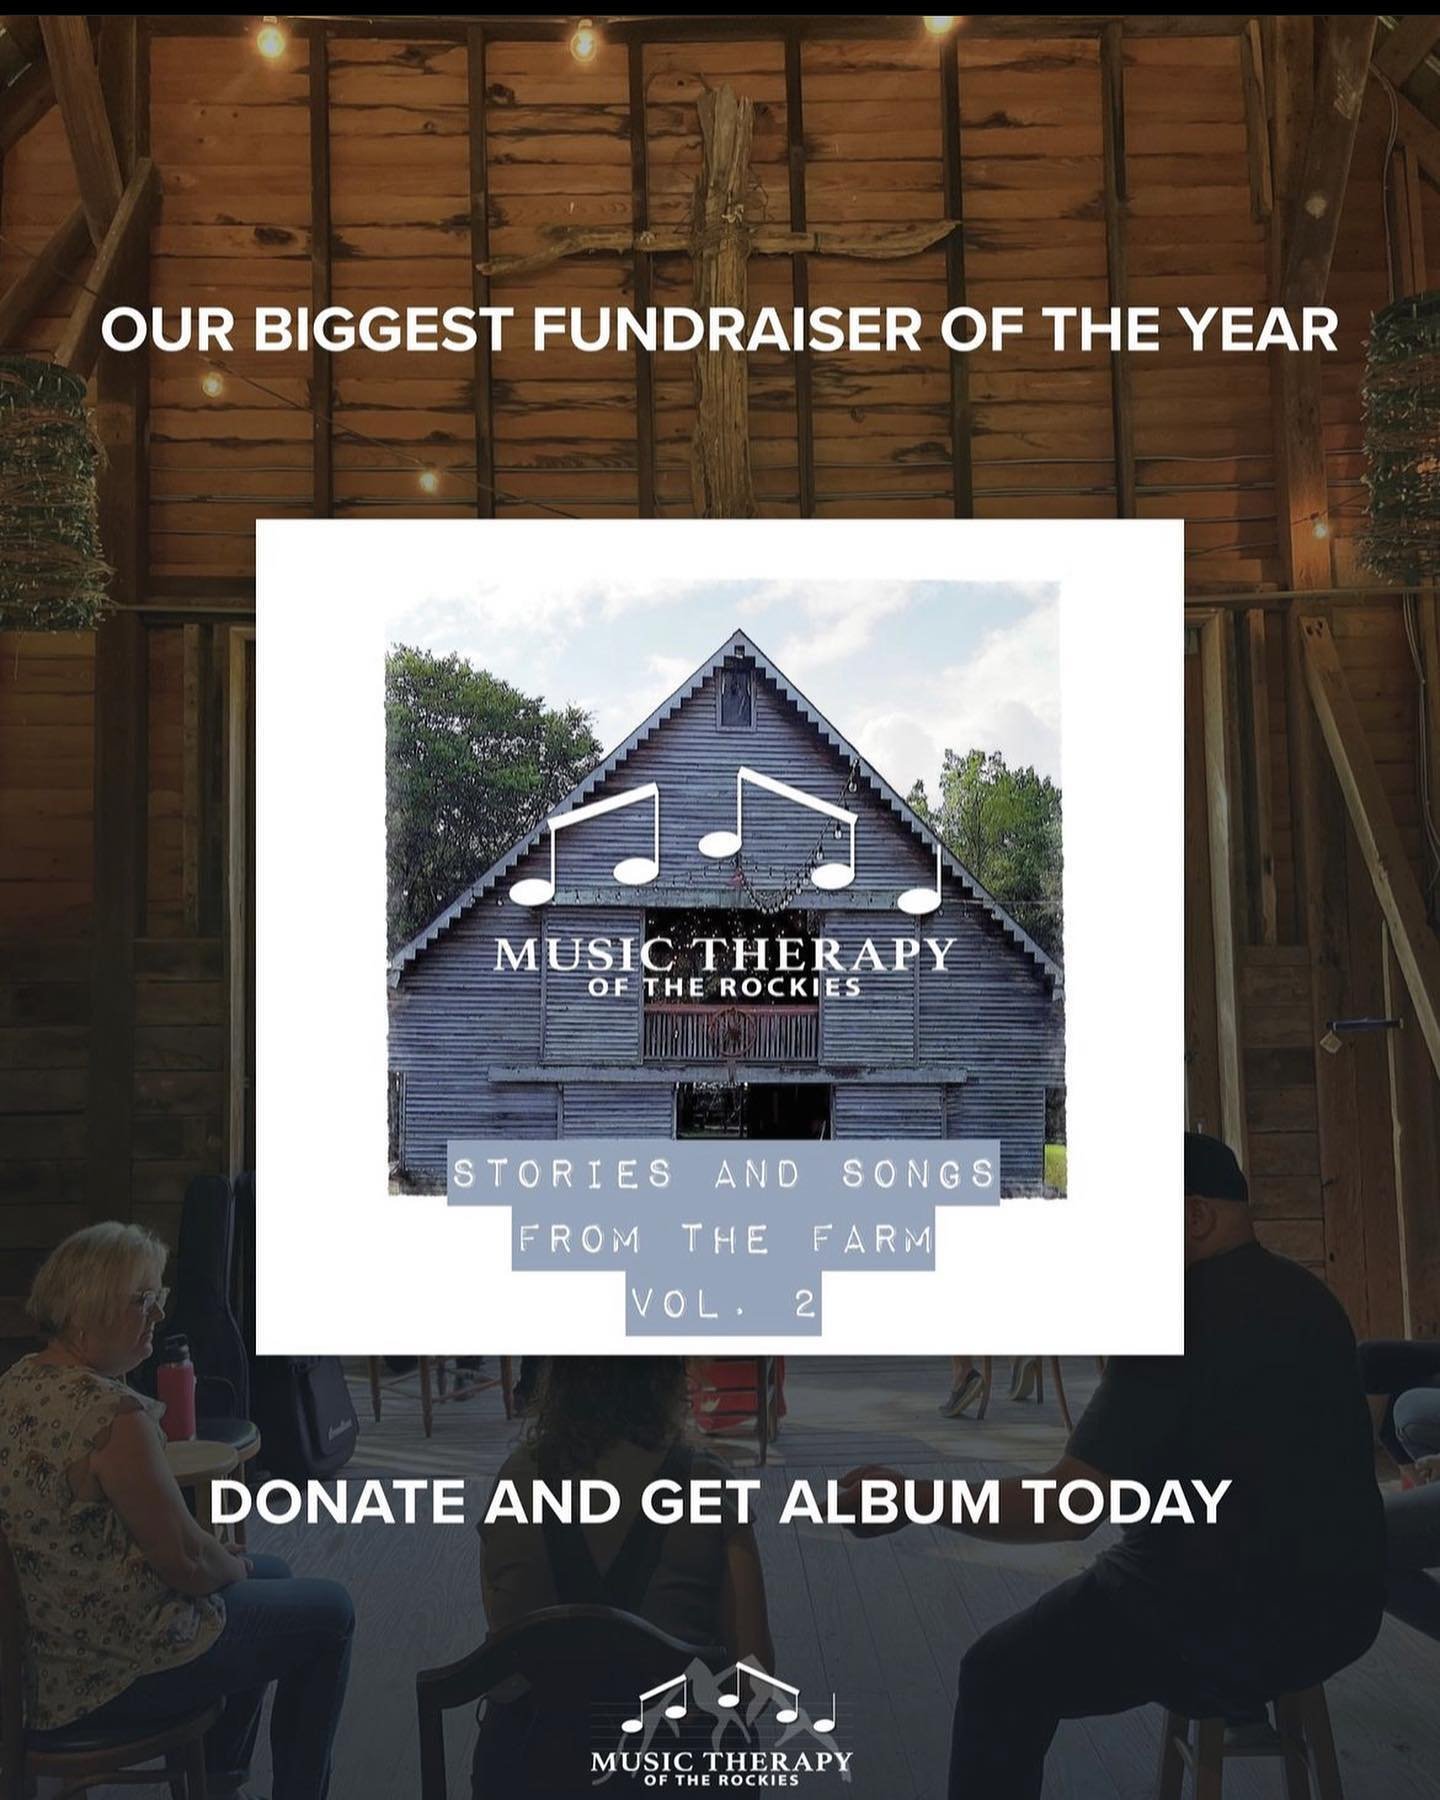 This summer, my friends @madalintara @madewithgoodness introduced me to @musictherapyoftherockies, and I immediately fell in love with their mission: helping veterans and other survivors of trauma heal through music. On their therapeutic retreats, pa